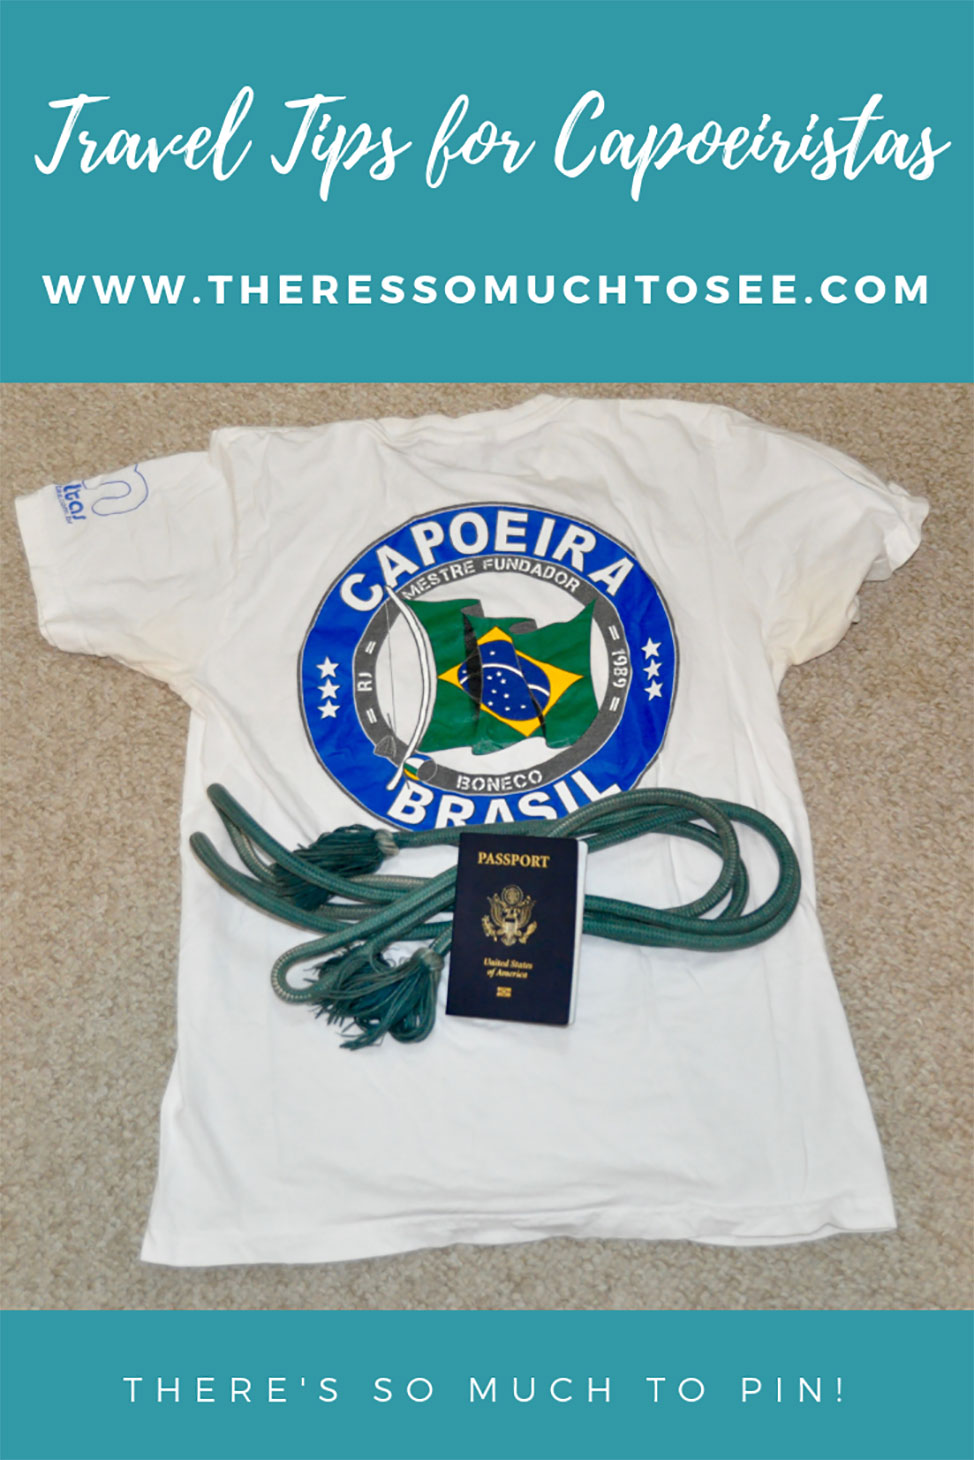 Pinnable Image to save this post on Tips for Capoeira Travels